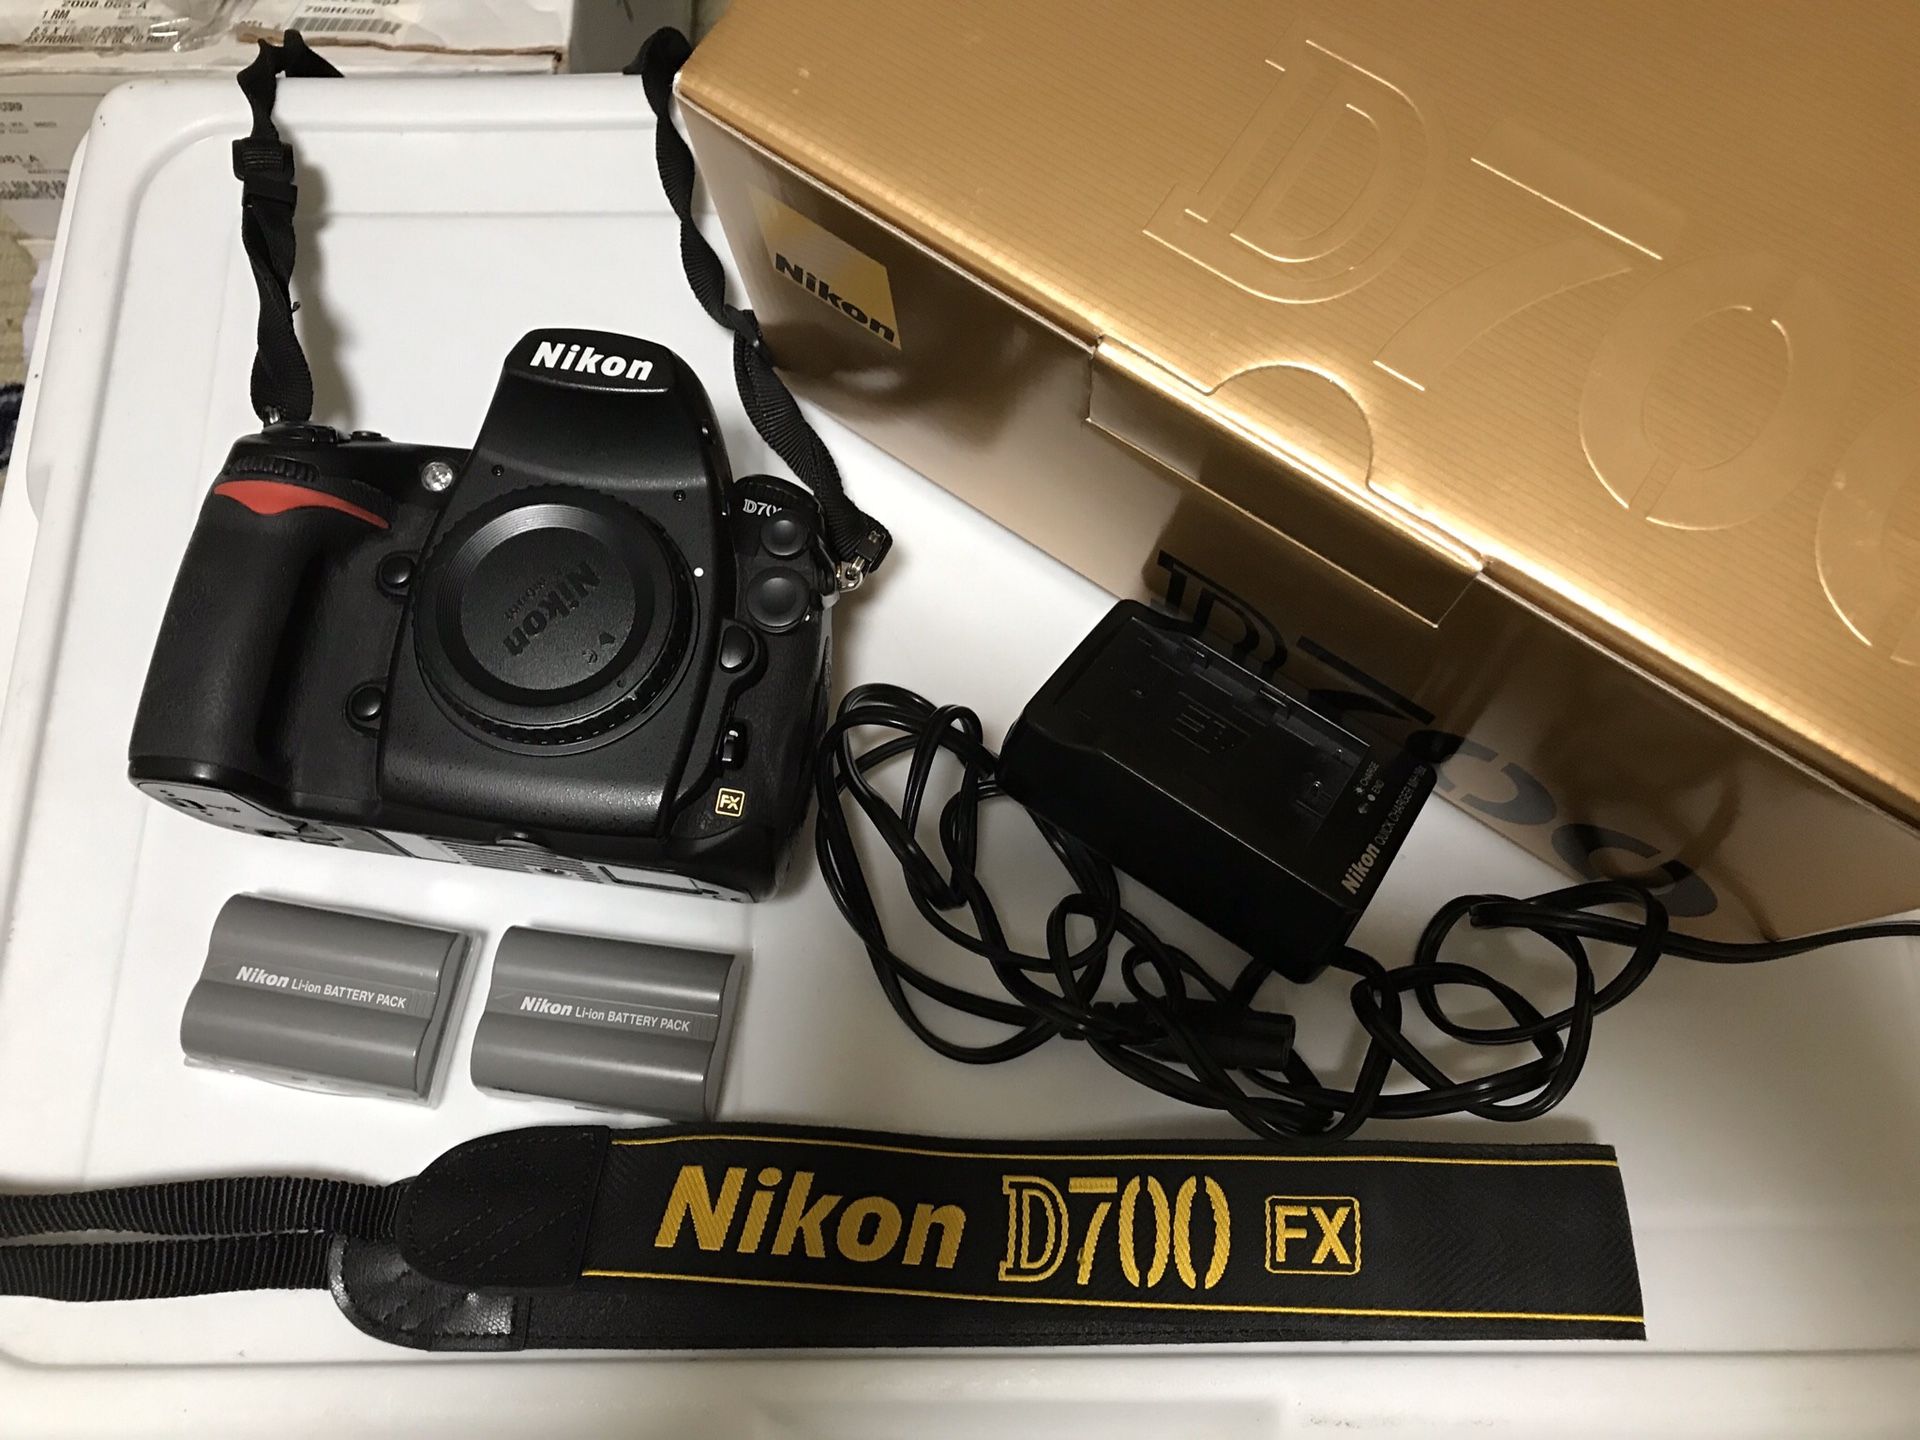 Nikon D700 with accessories